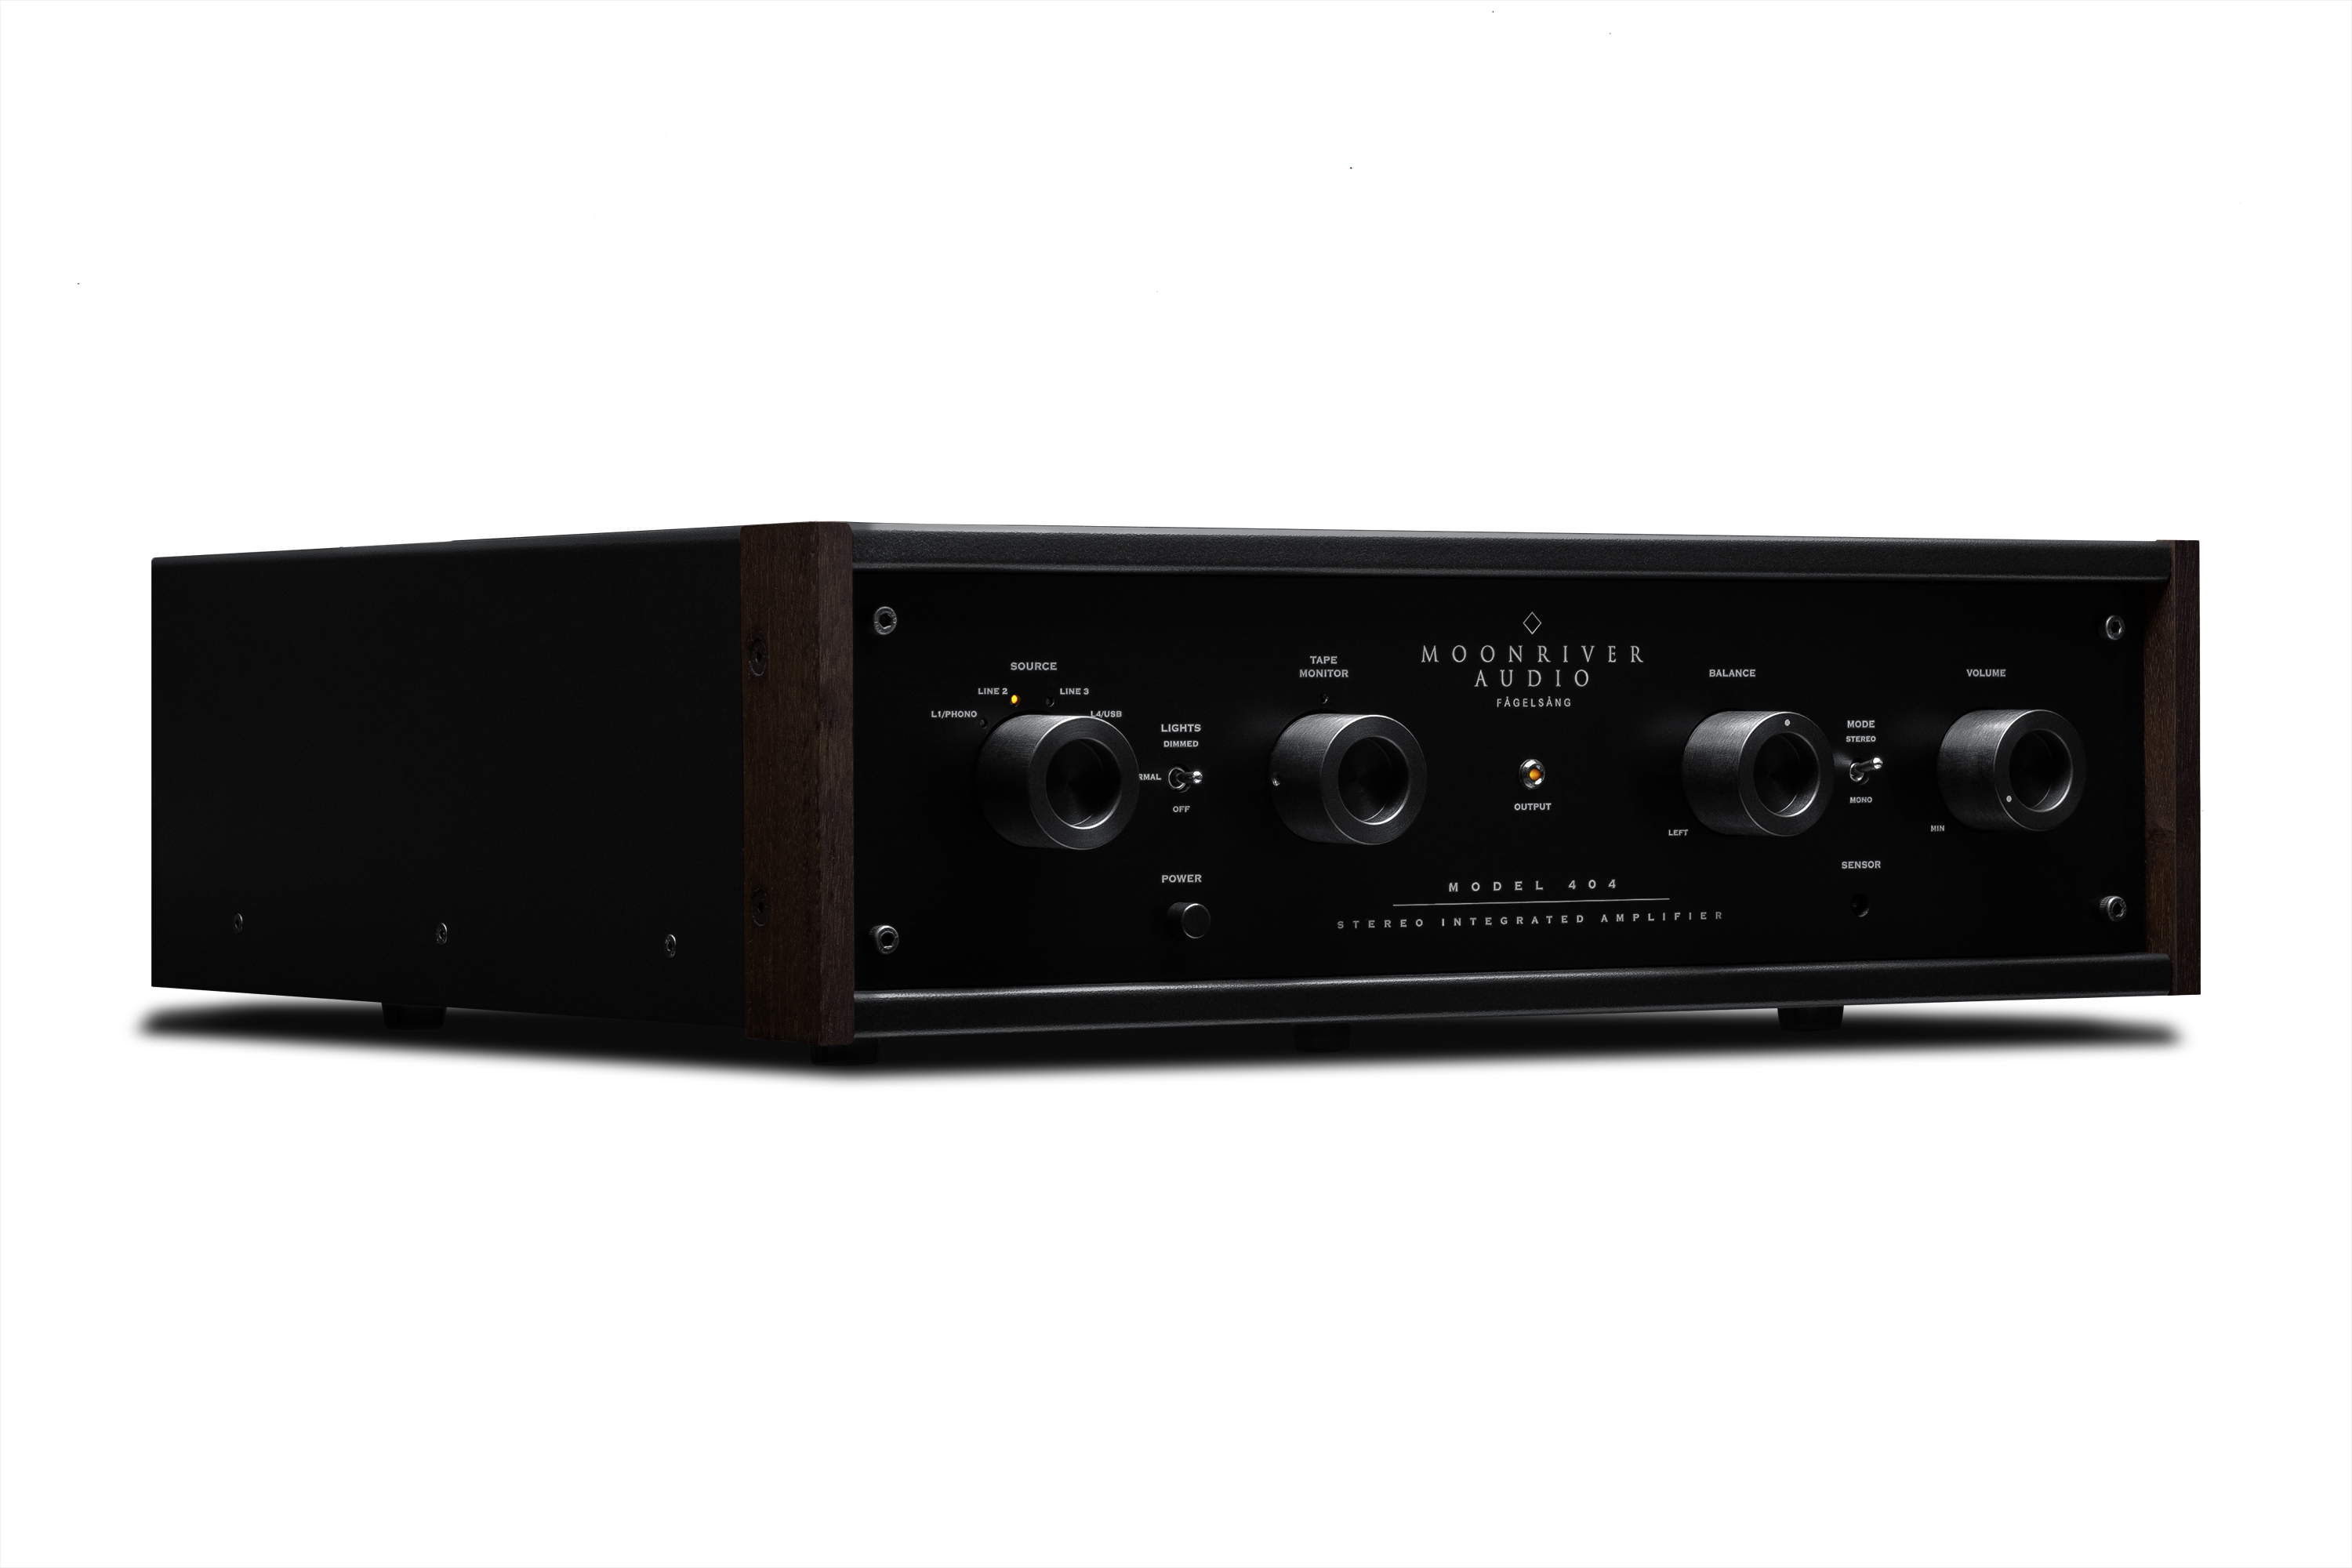 The 404 integrated amplifier – Moonriver Audio